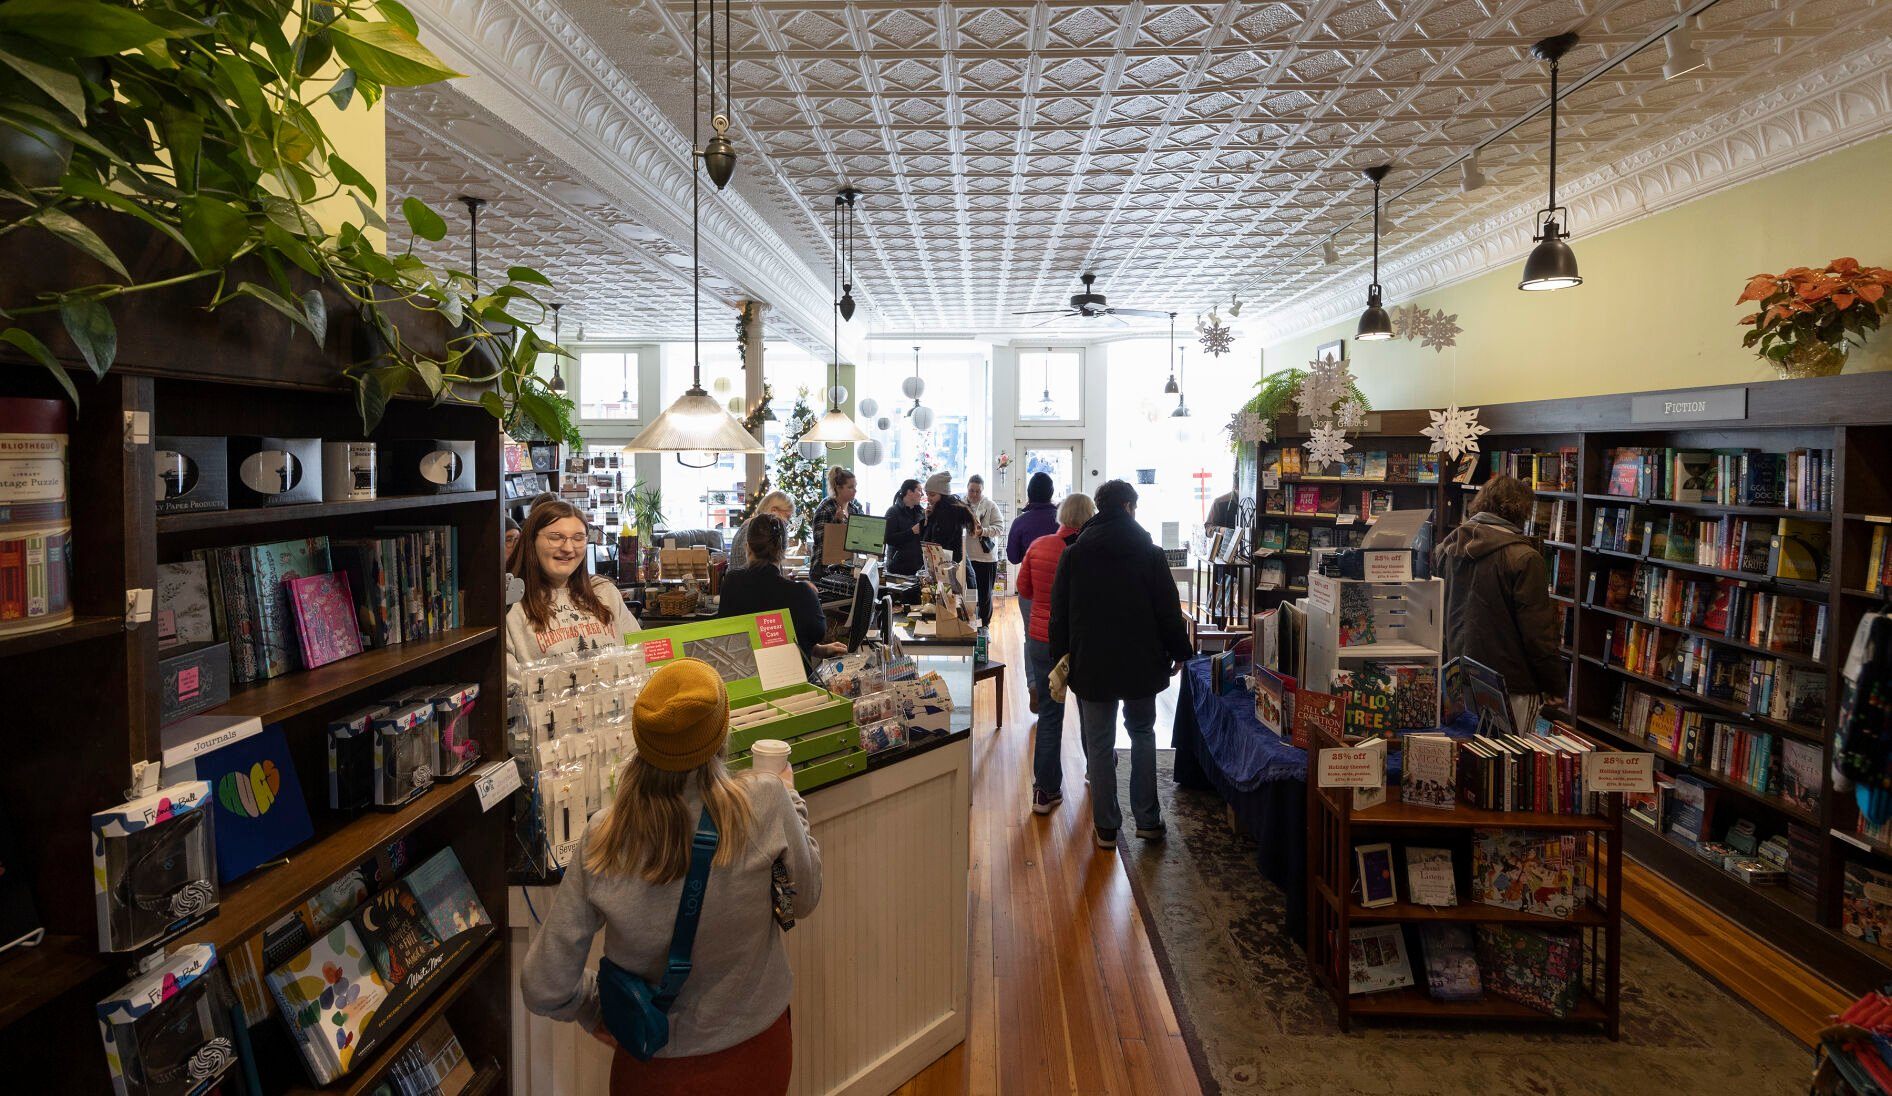 Shoppers browse books at River Lights Bookstore in Dubuque.    PHOTO CREDIT: Stephen Gassman
Telegraph Herald